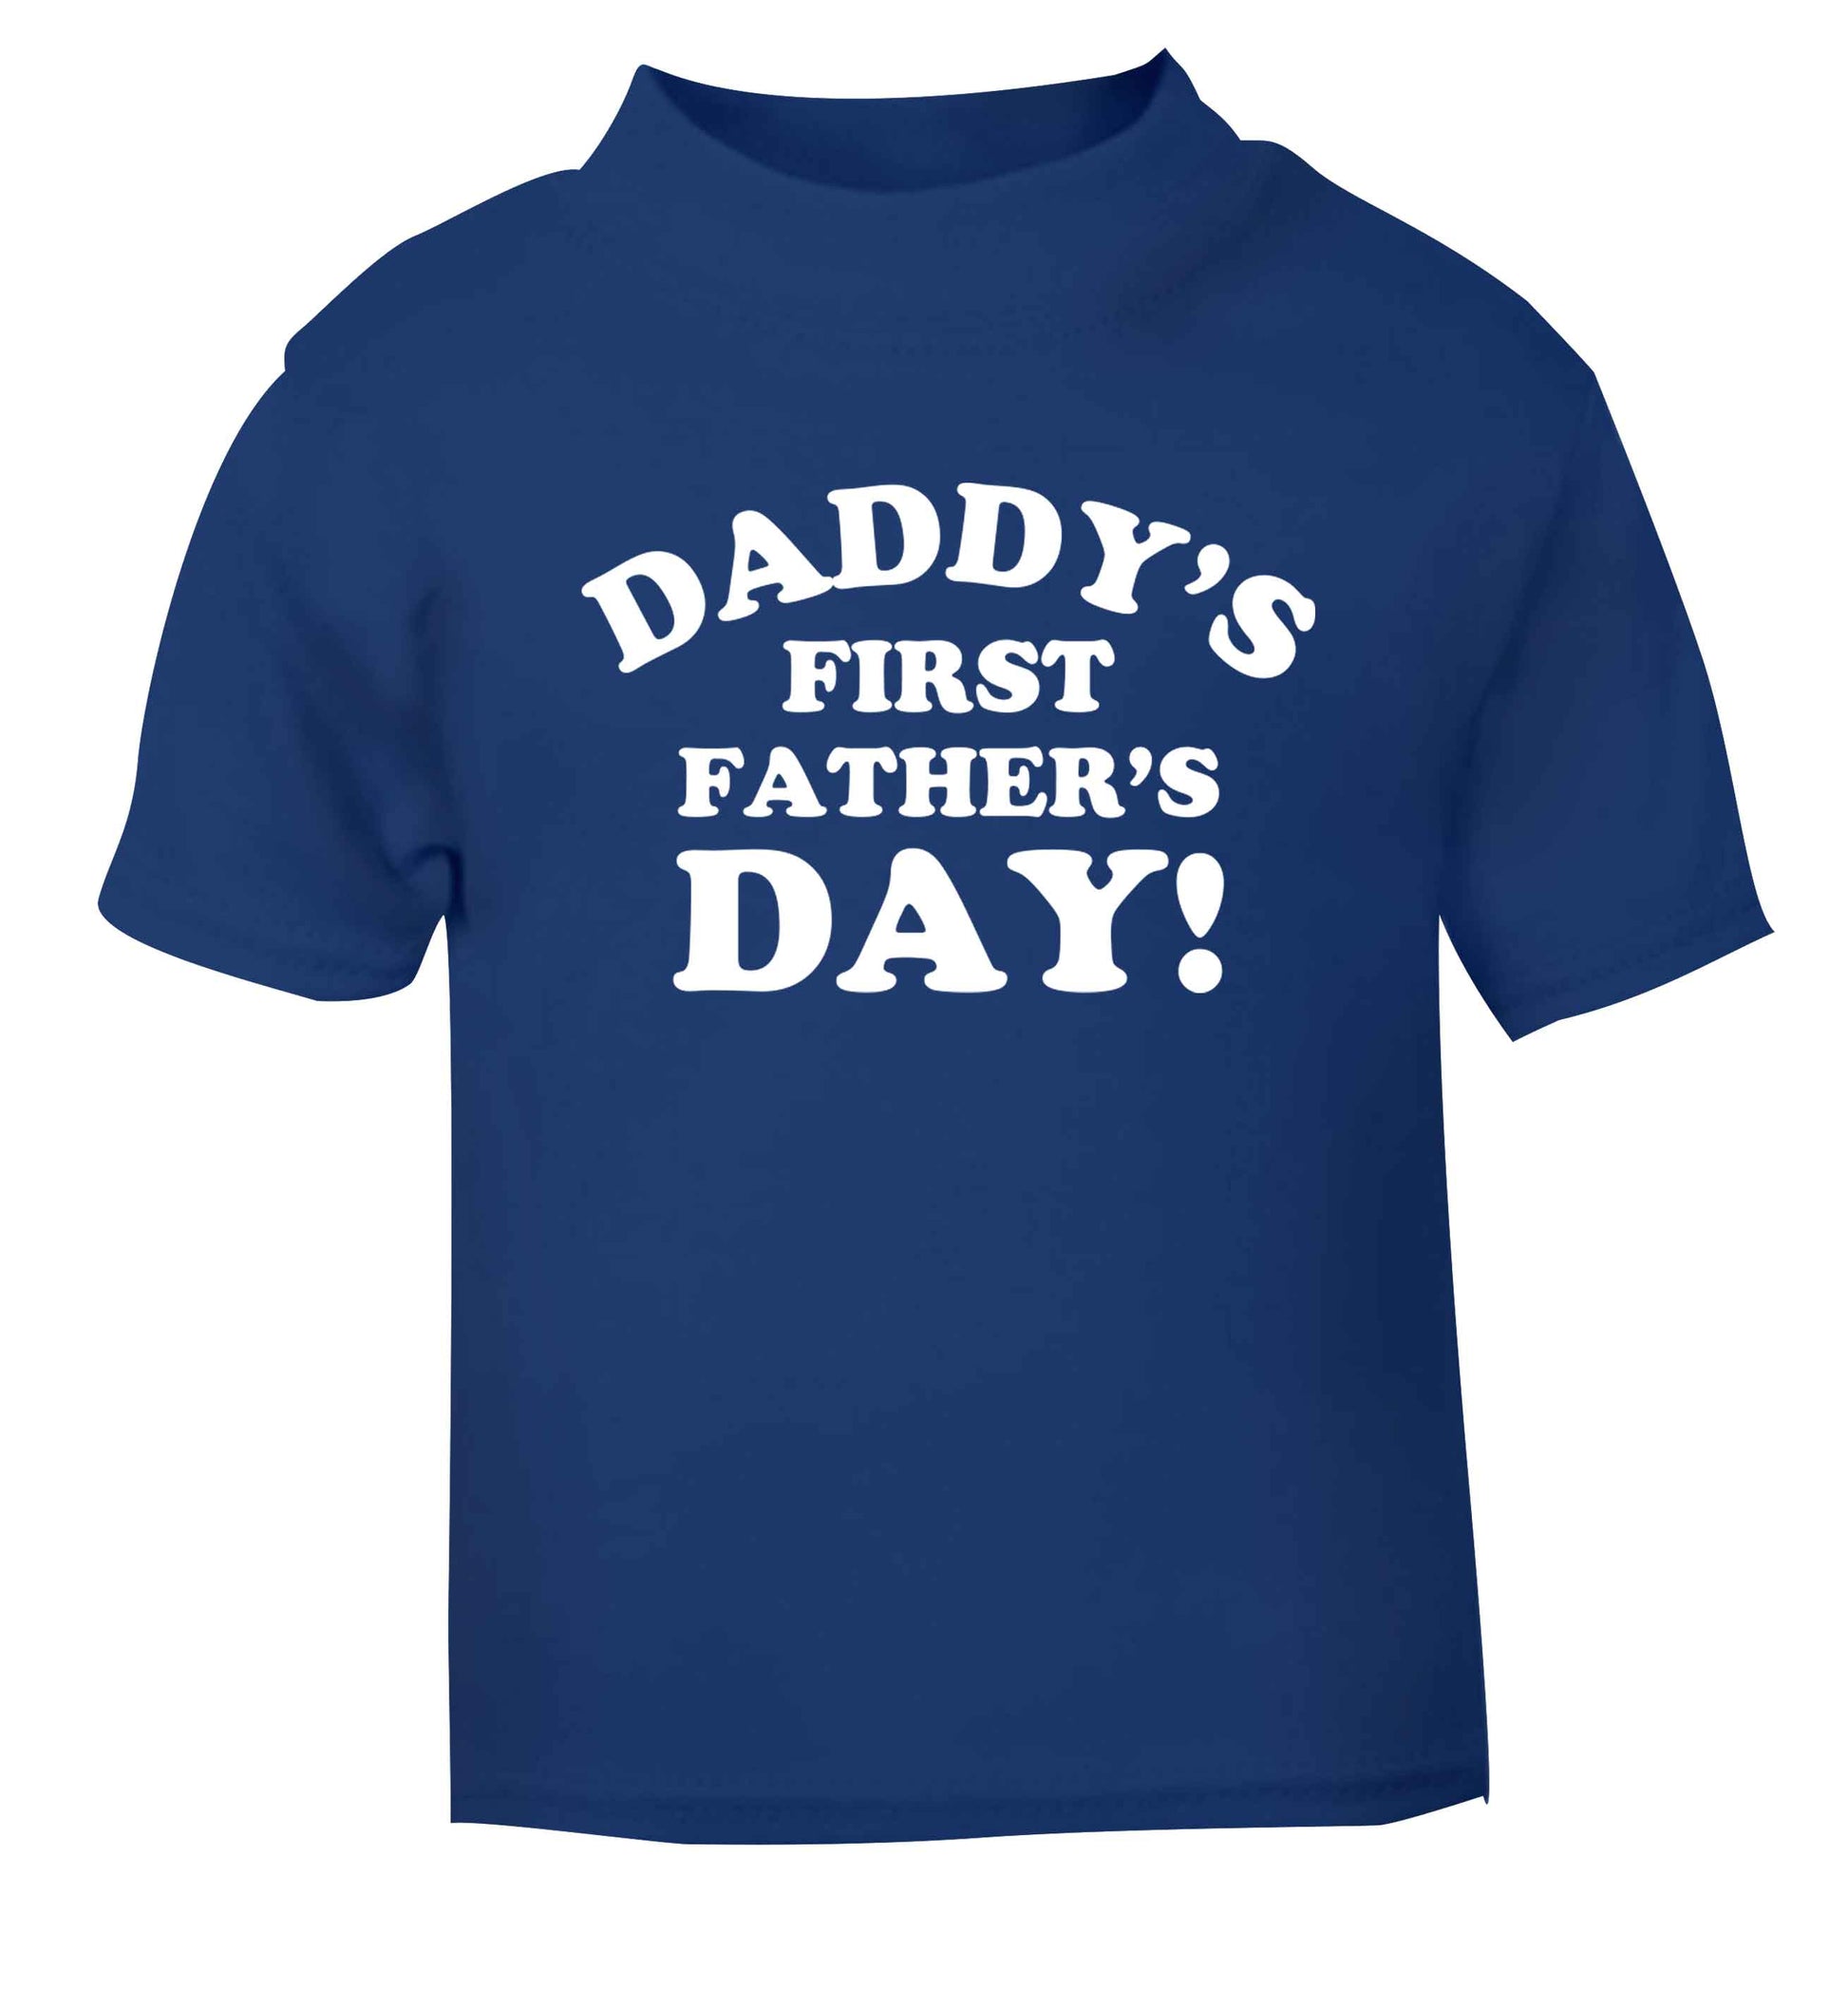 Daddy's first father's day blue baby toddler Tshirt 2 Years